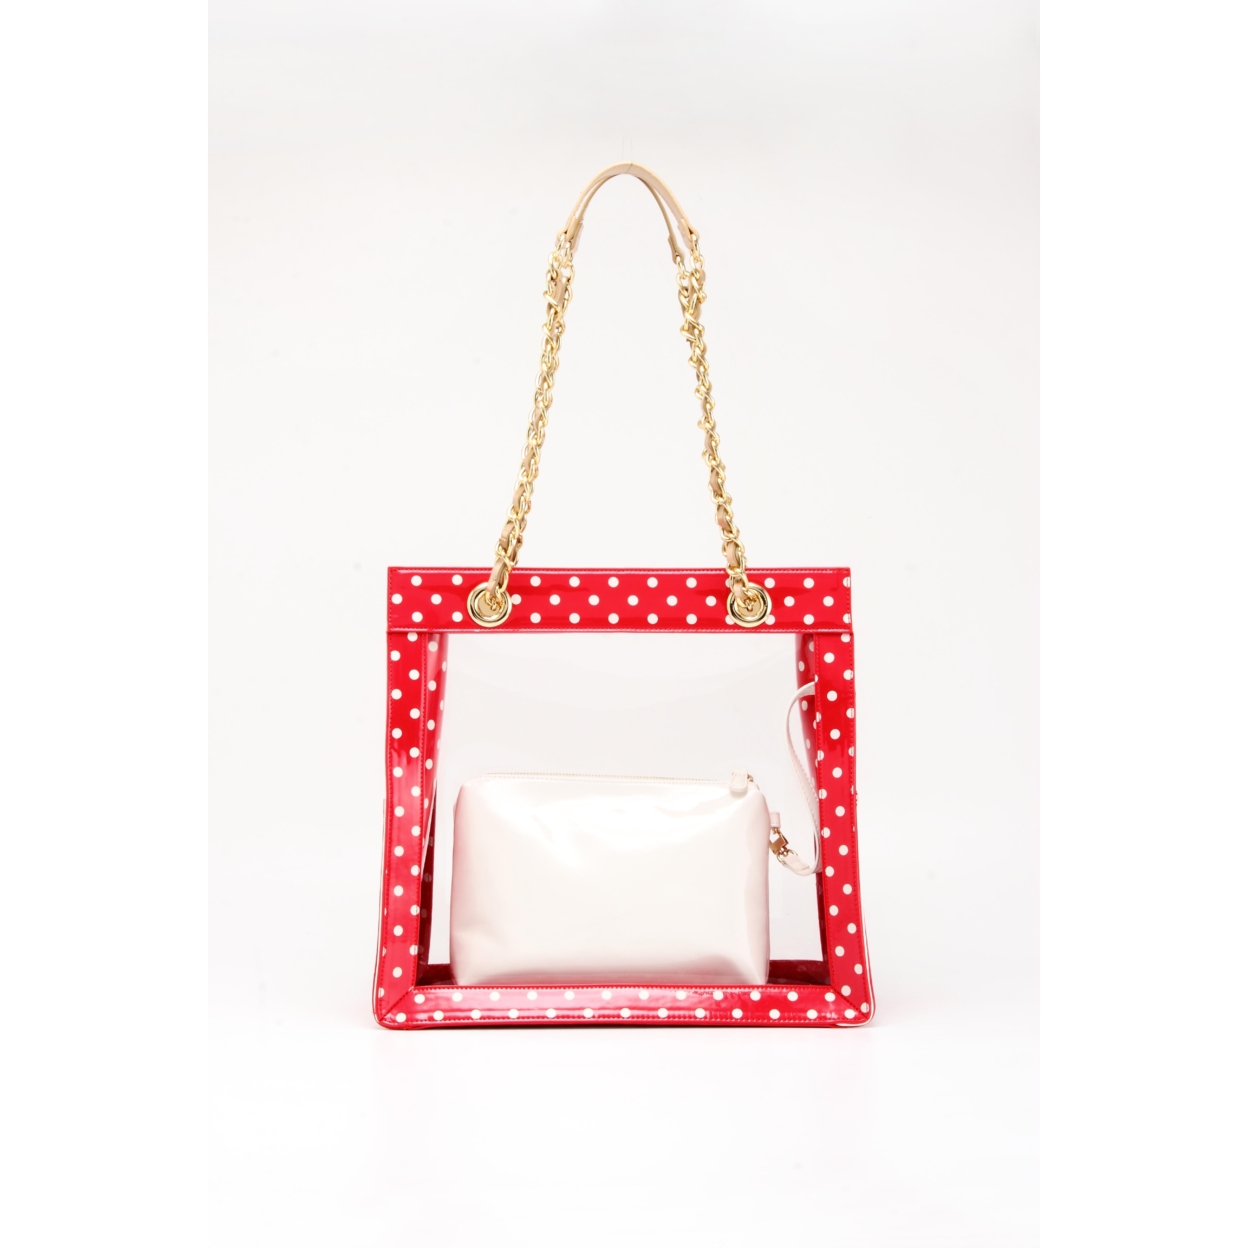 SCORE! Andrea Large Clear Designer Tote For School, Work, Travel - Racing Red, White And Gold